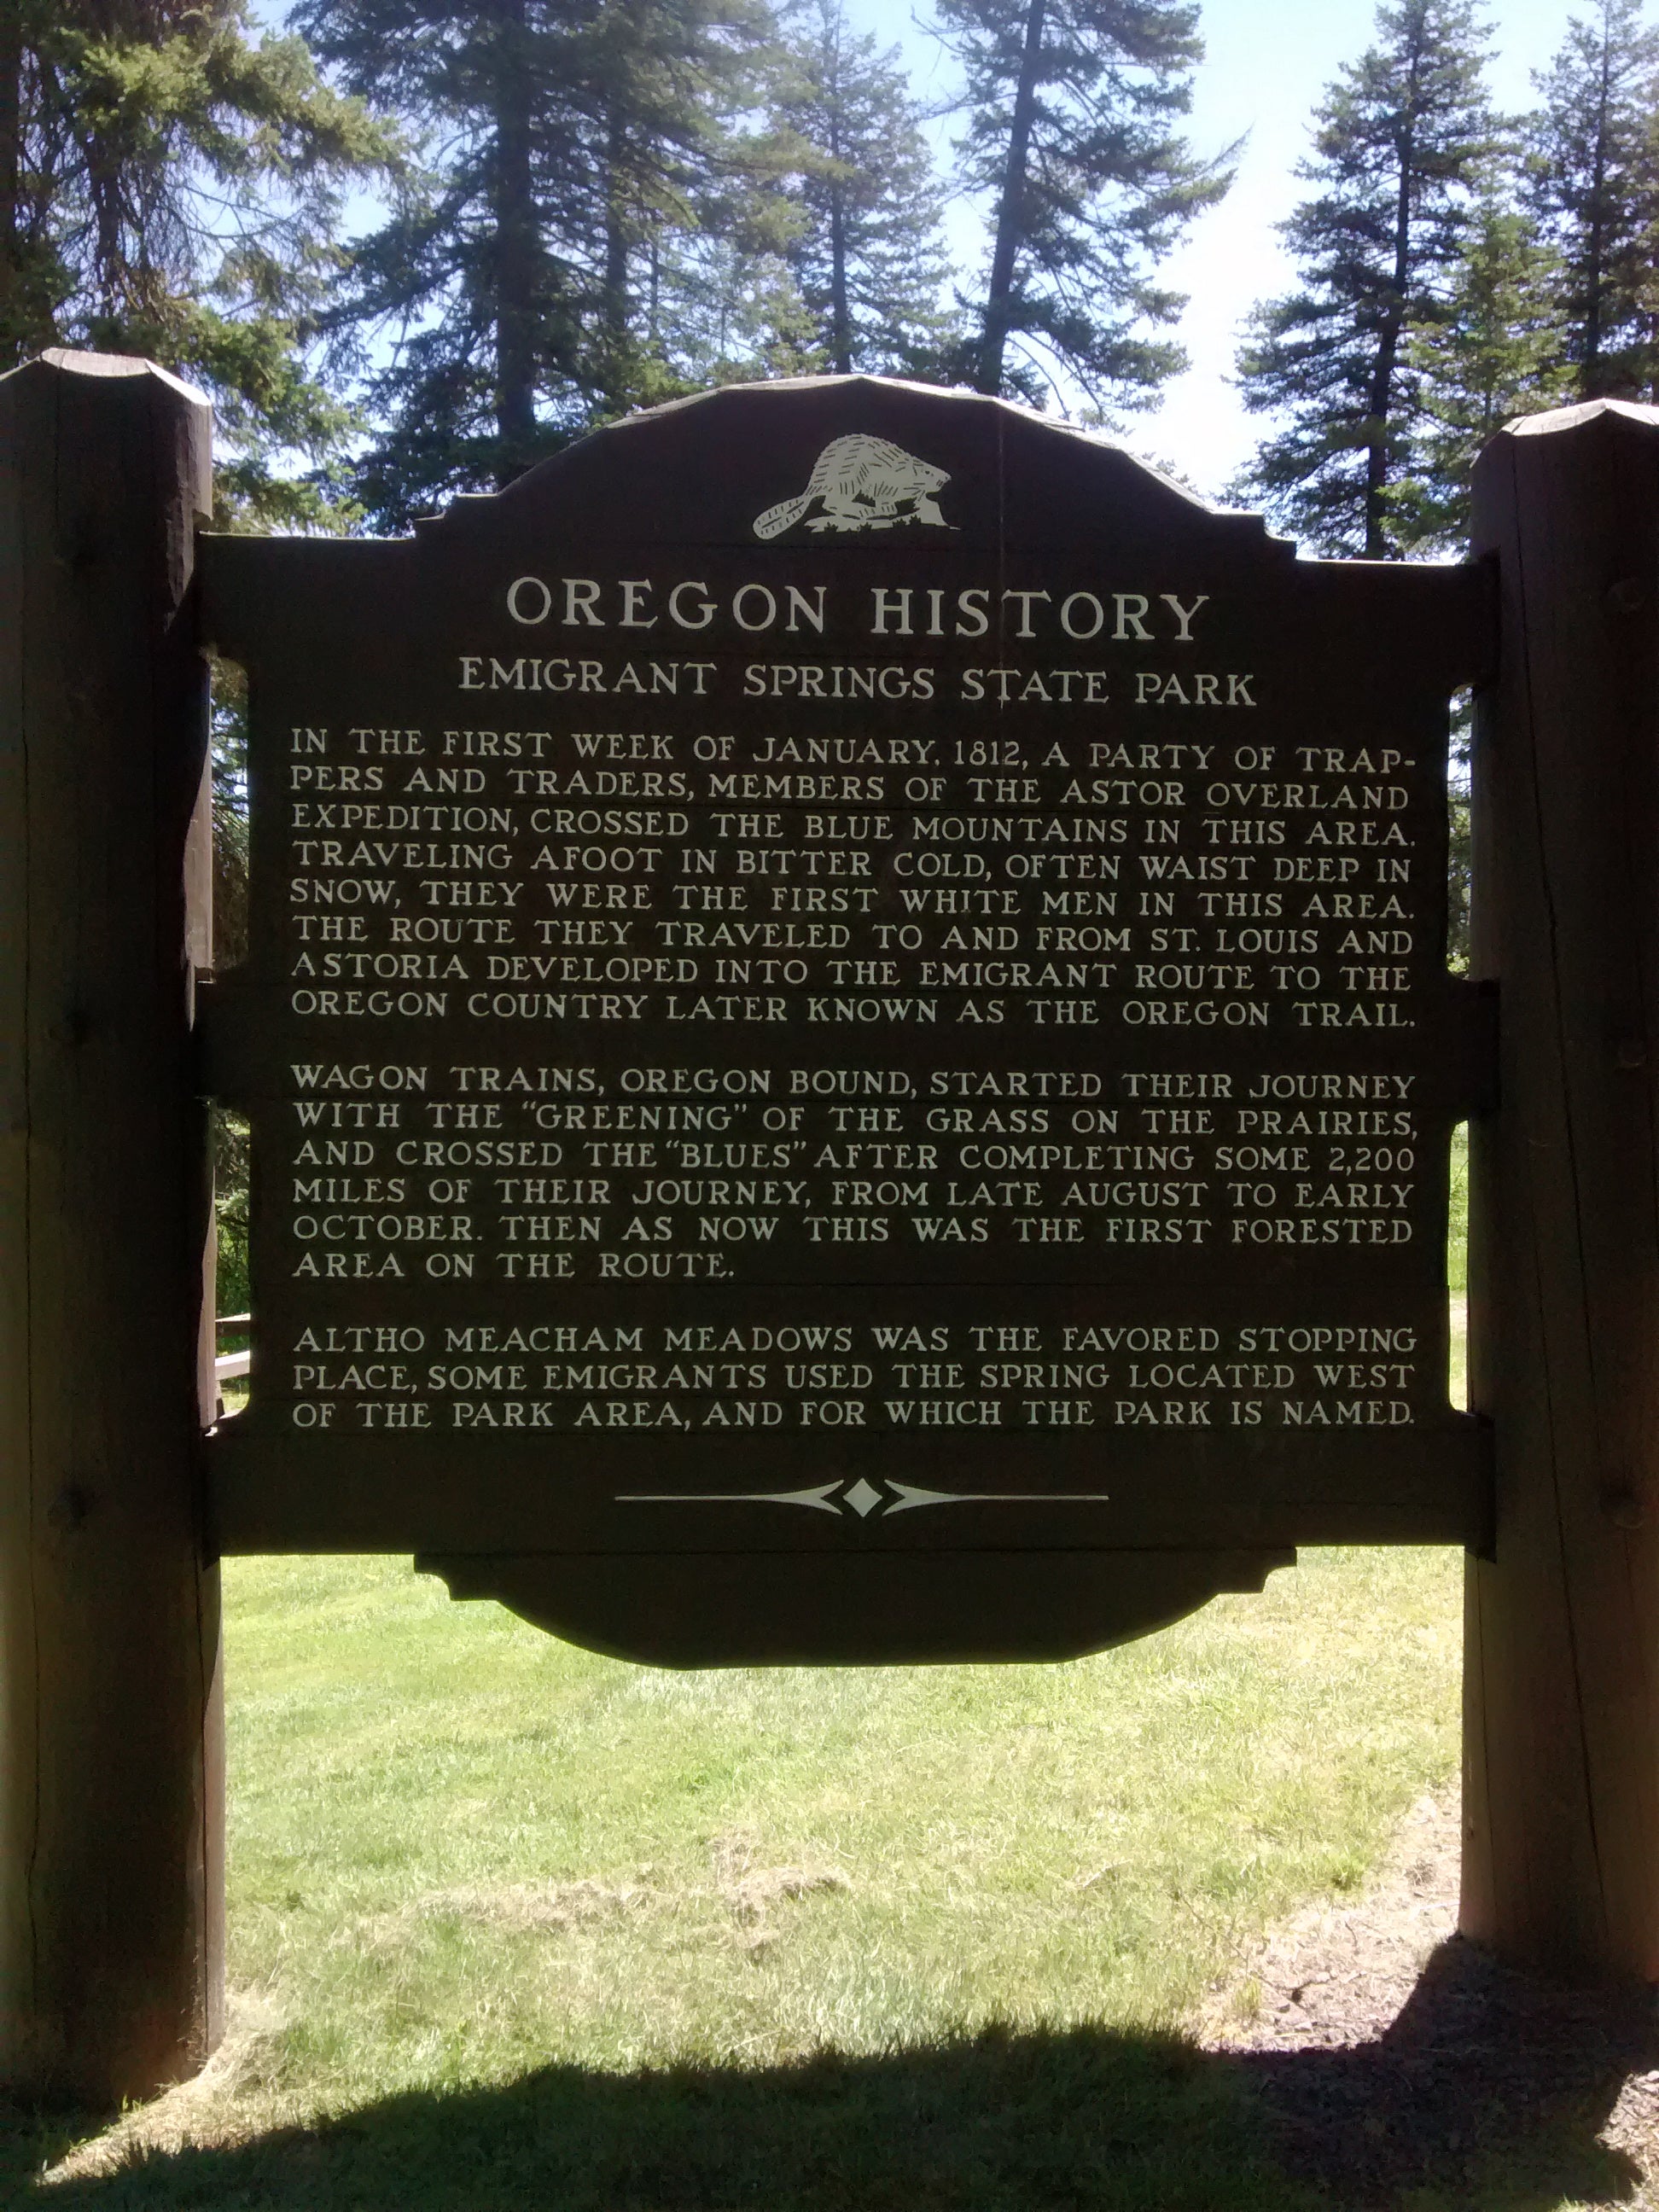 Welcome sign with Heritage information